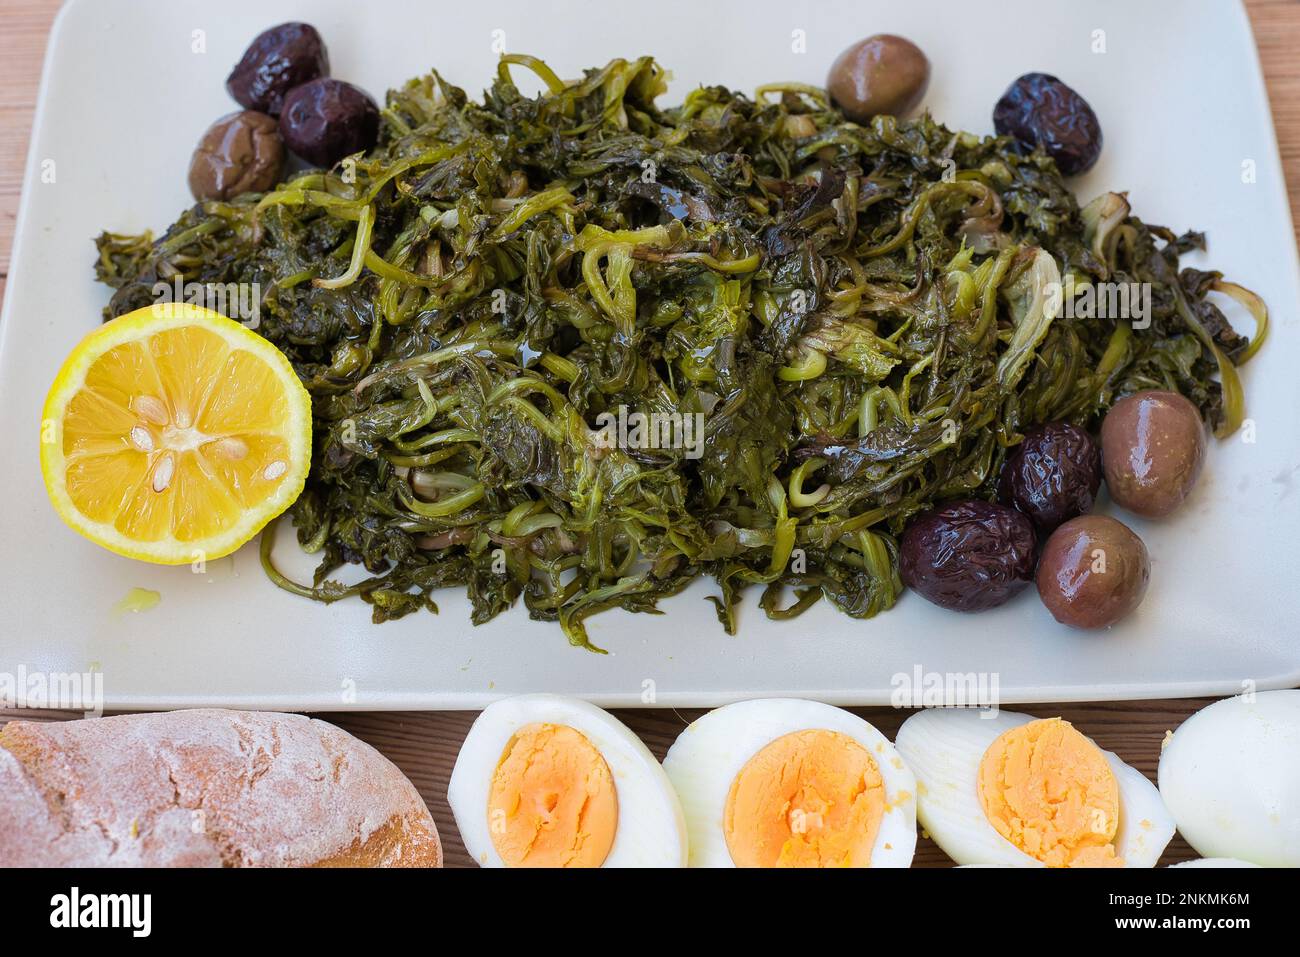 boiled wild greens, dandelion, lemons and extra virgin olive oil, on a wooden table. Horta or Wild Greens. Greek Cuisine. Stock Photo